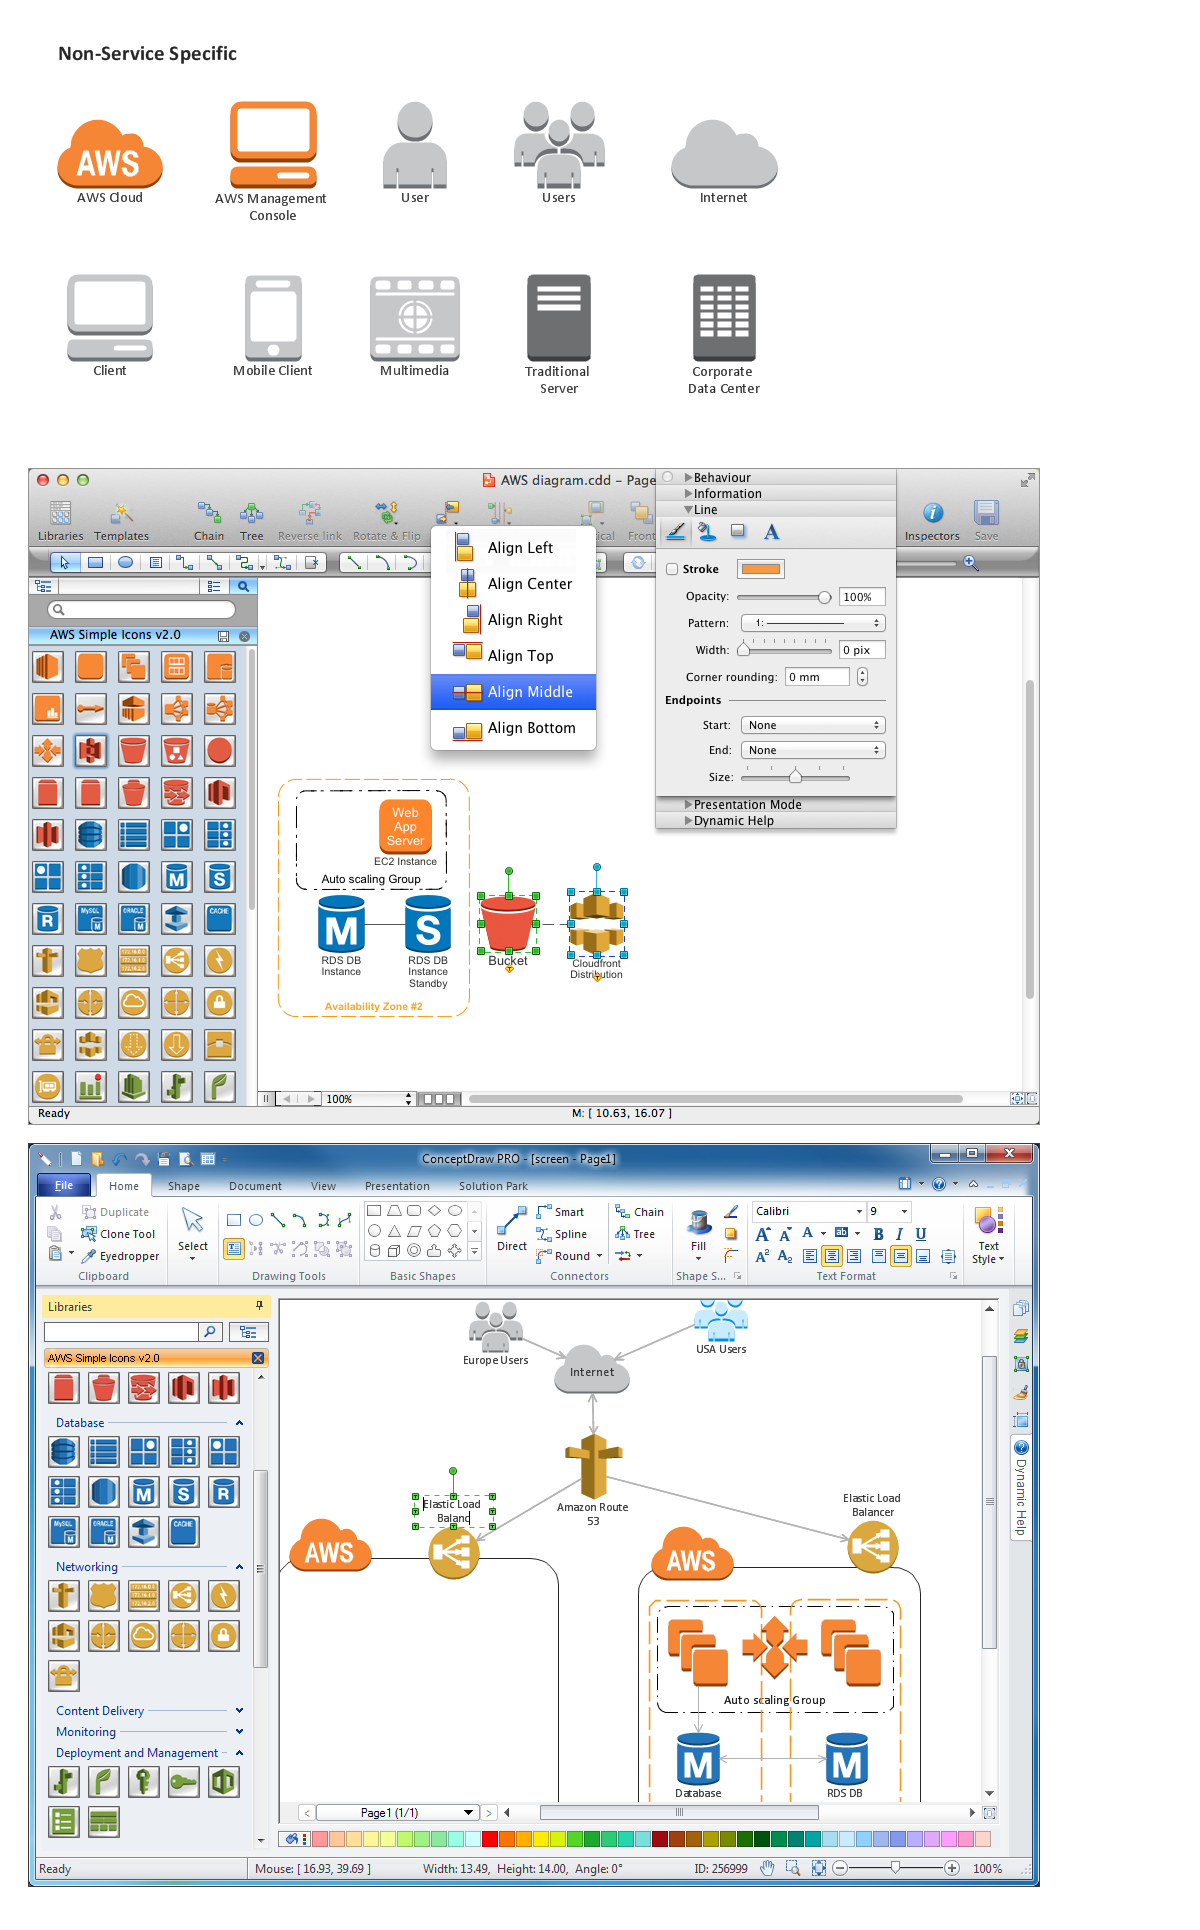 Amazon-Web-Services-AWS-Design-Elements-icons-Non-Service-Specific using conceptdraw solution park web tool